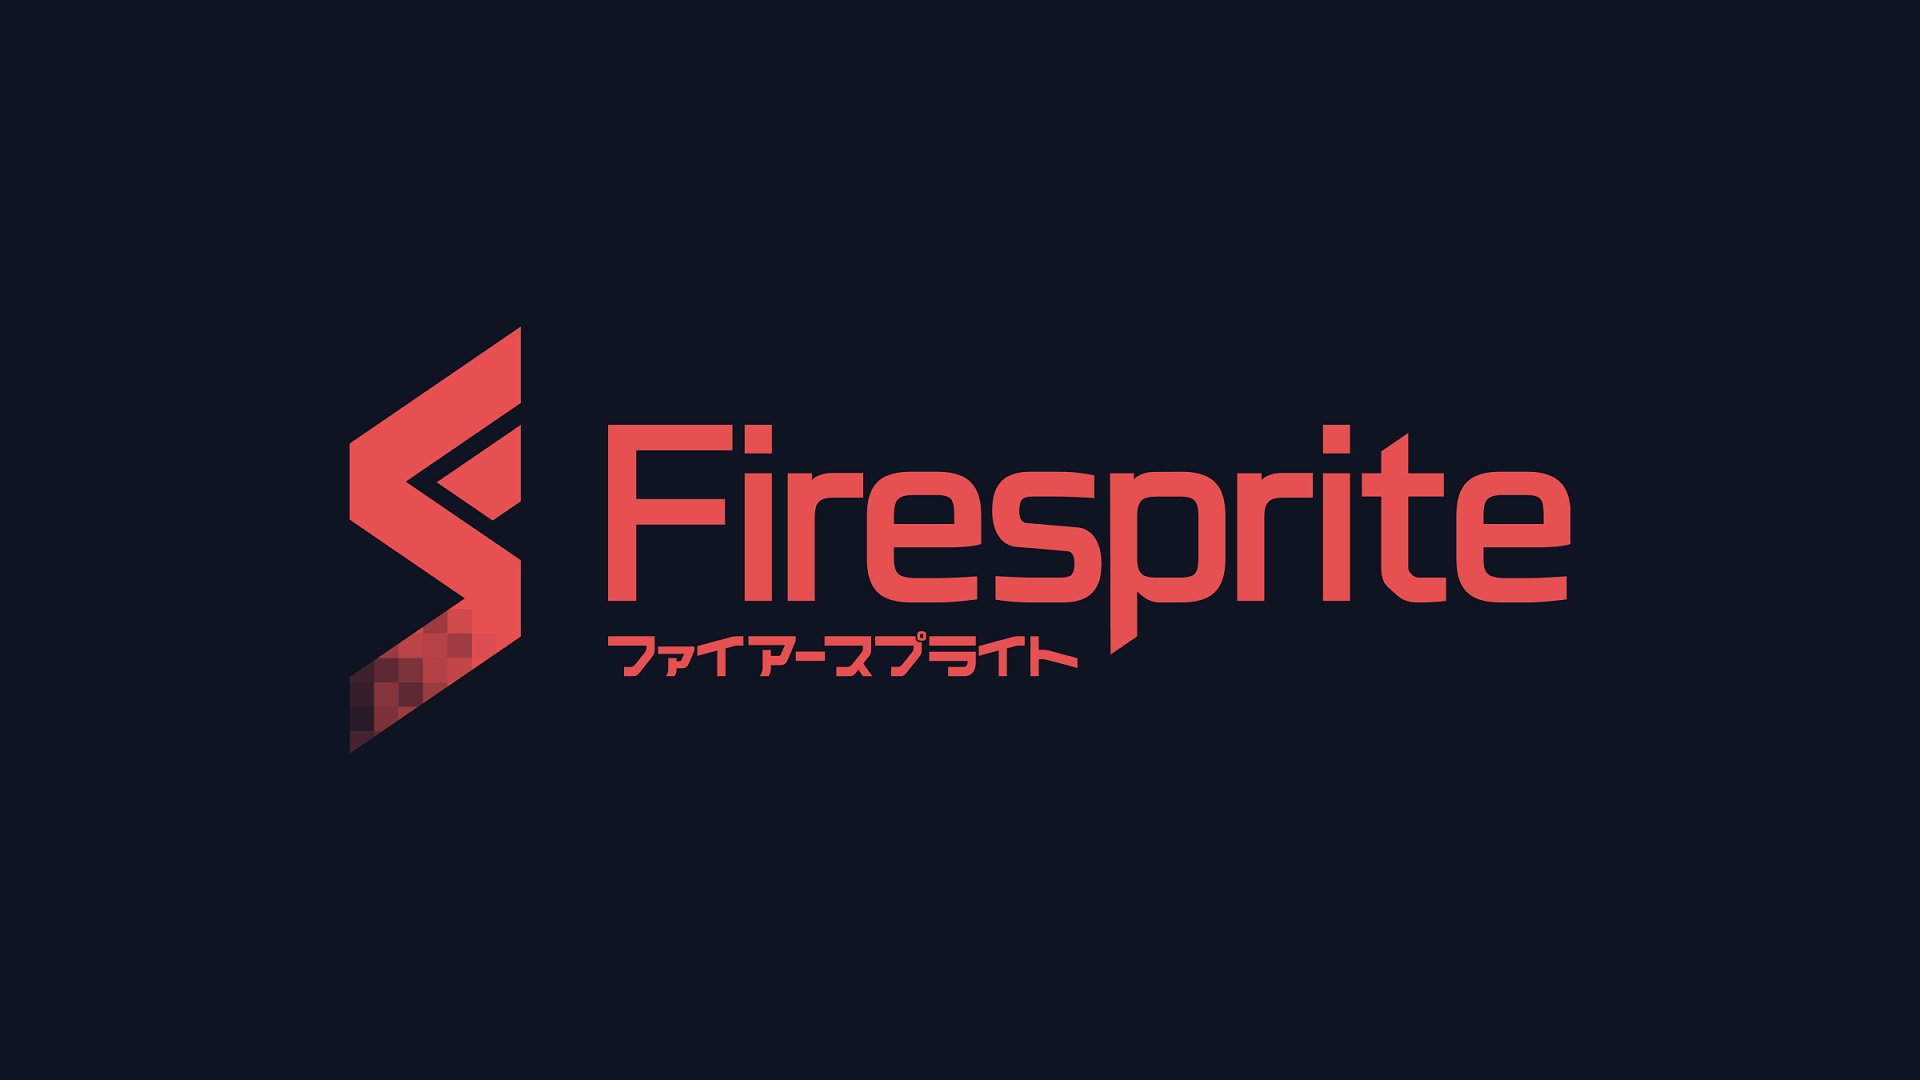 First-Party PlayStation Studio Firesprite Accused of Having a Toxic Workplace Culture